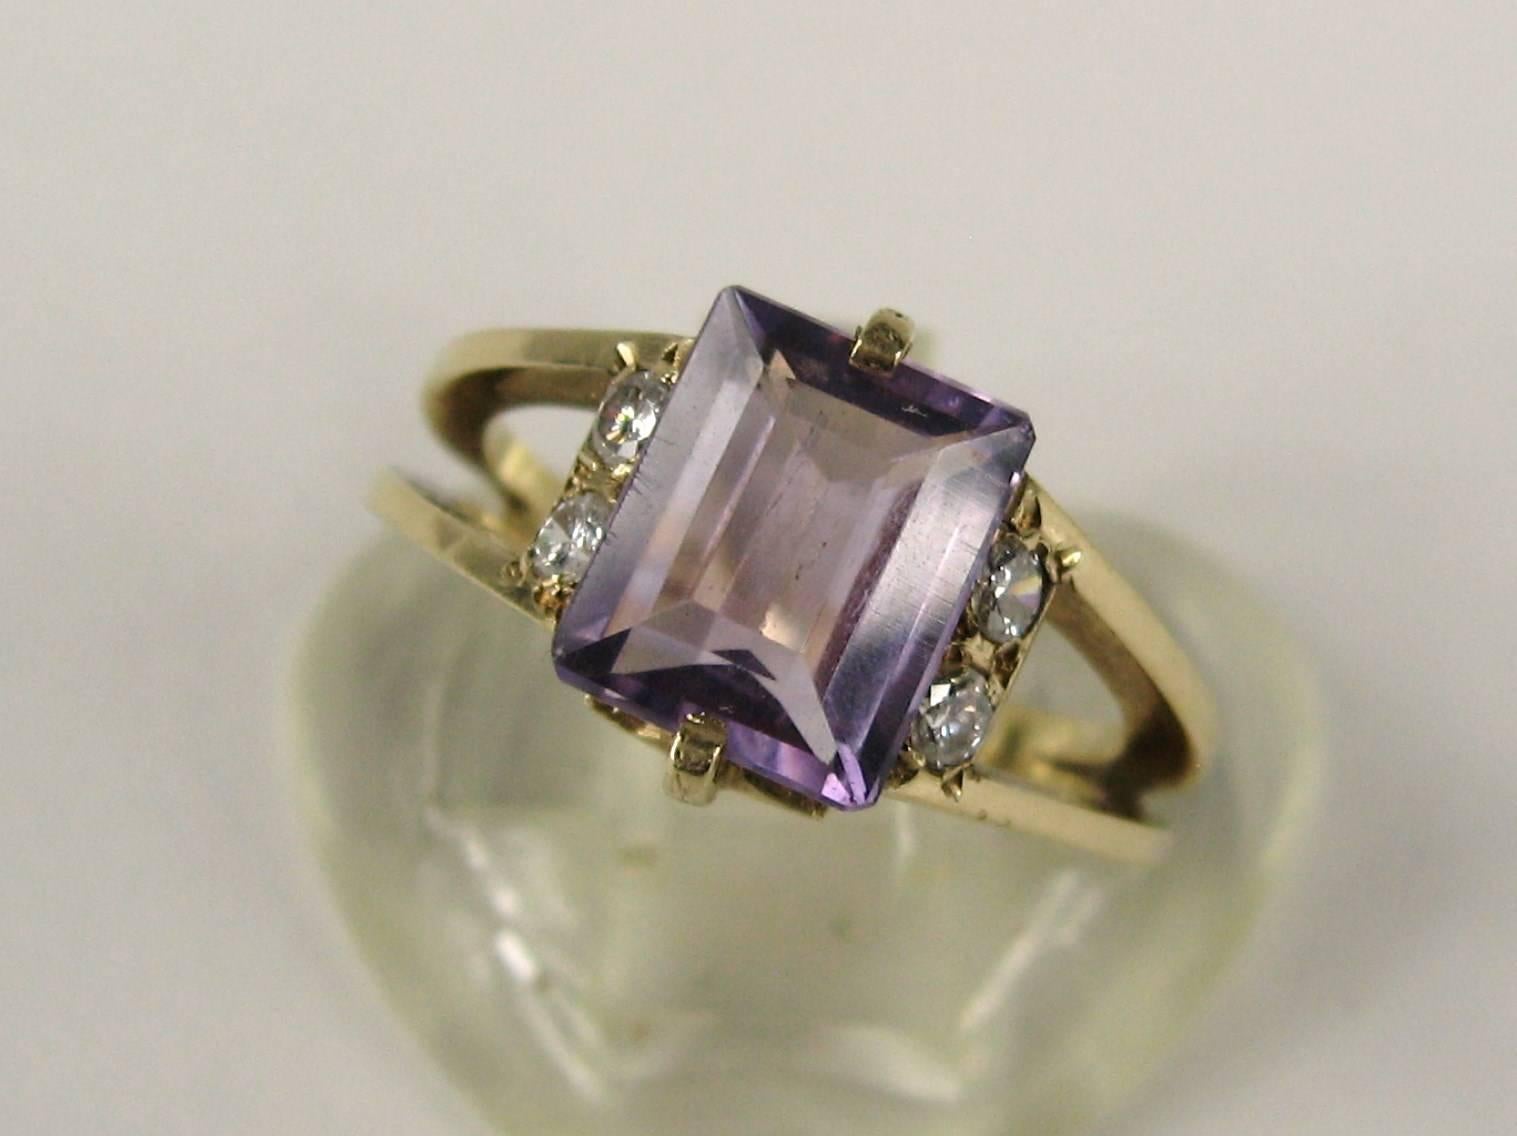 Modernist Amethyst Diamond Ring 14 Karat In Good Condition For Sale In Wallkill, NY